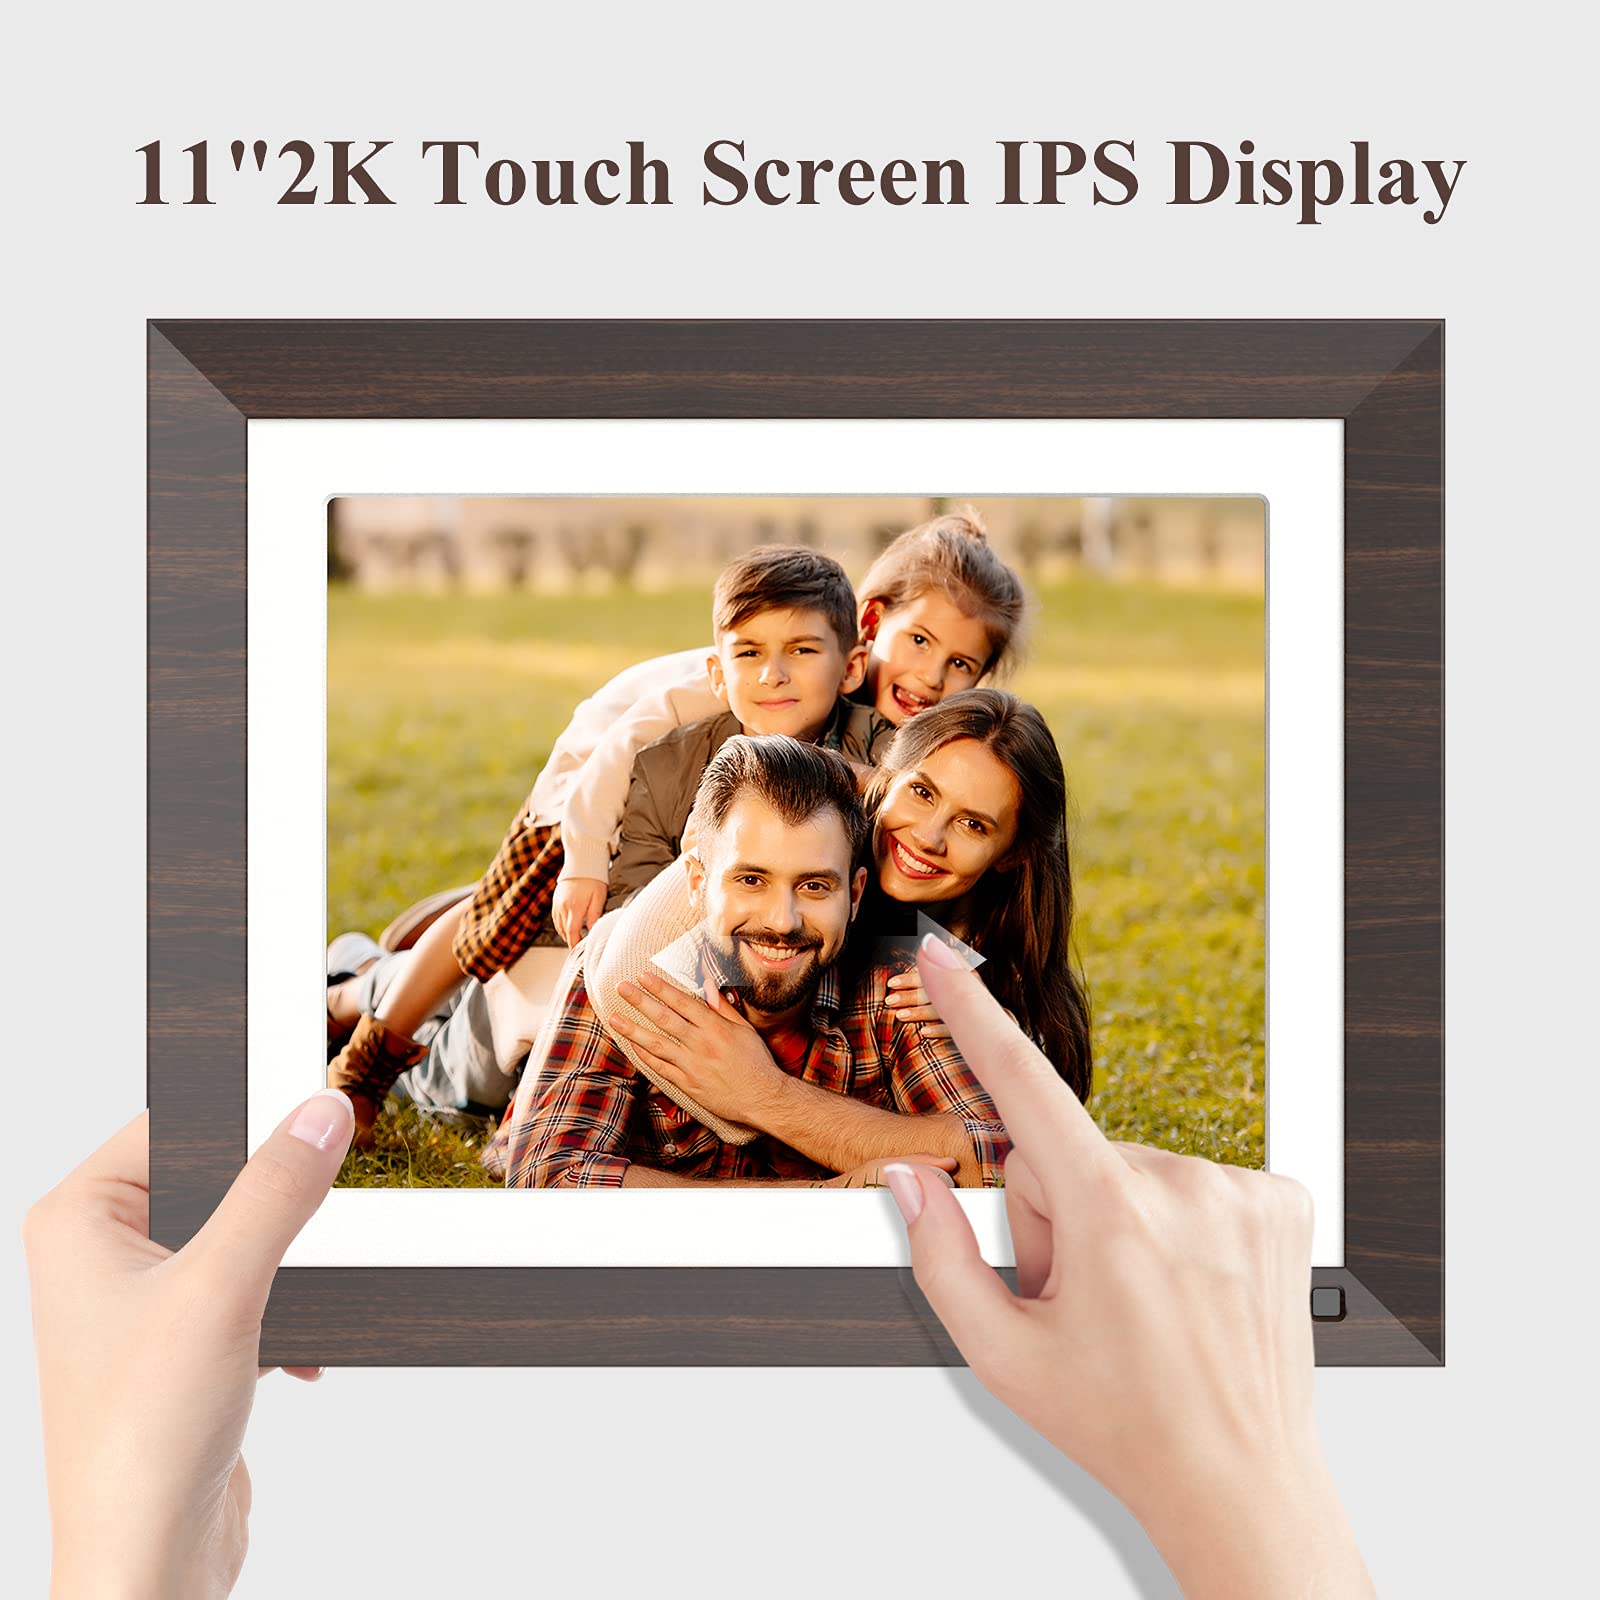 ZTSWKJ Digital Frame 2K -11 inch WiFi Digital Picture Frame, Email Photo from Anywhere, Touch Screen Display, Box Speaker, Motion Sensor, One Minute Setup, Gift for Friends and Family (Wood Effect)